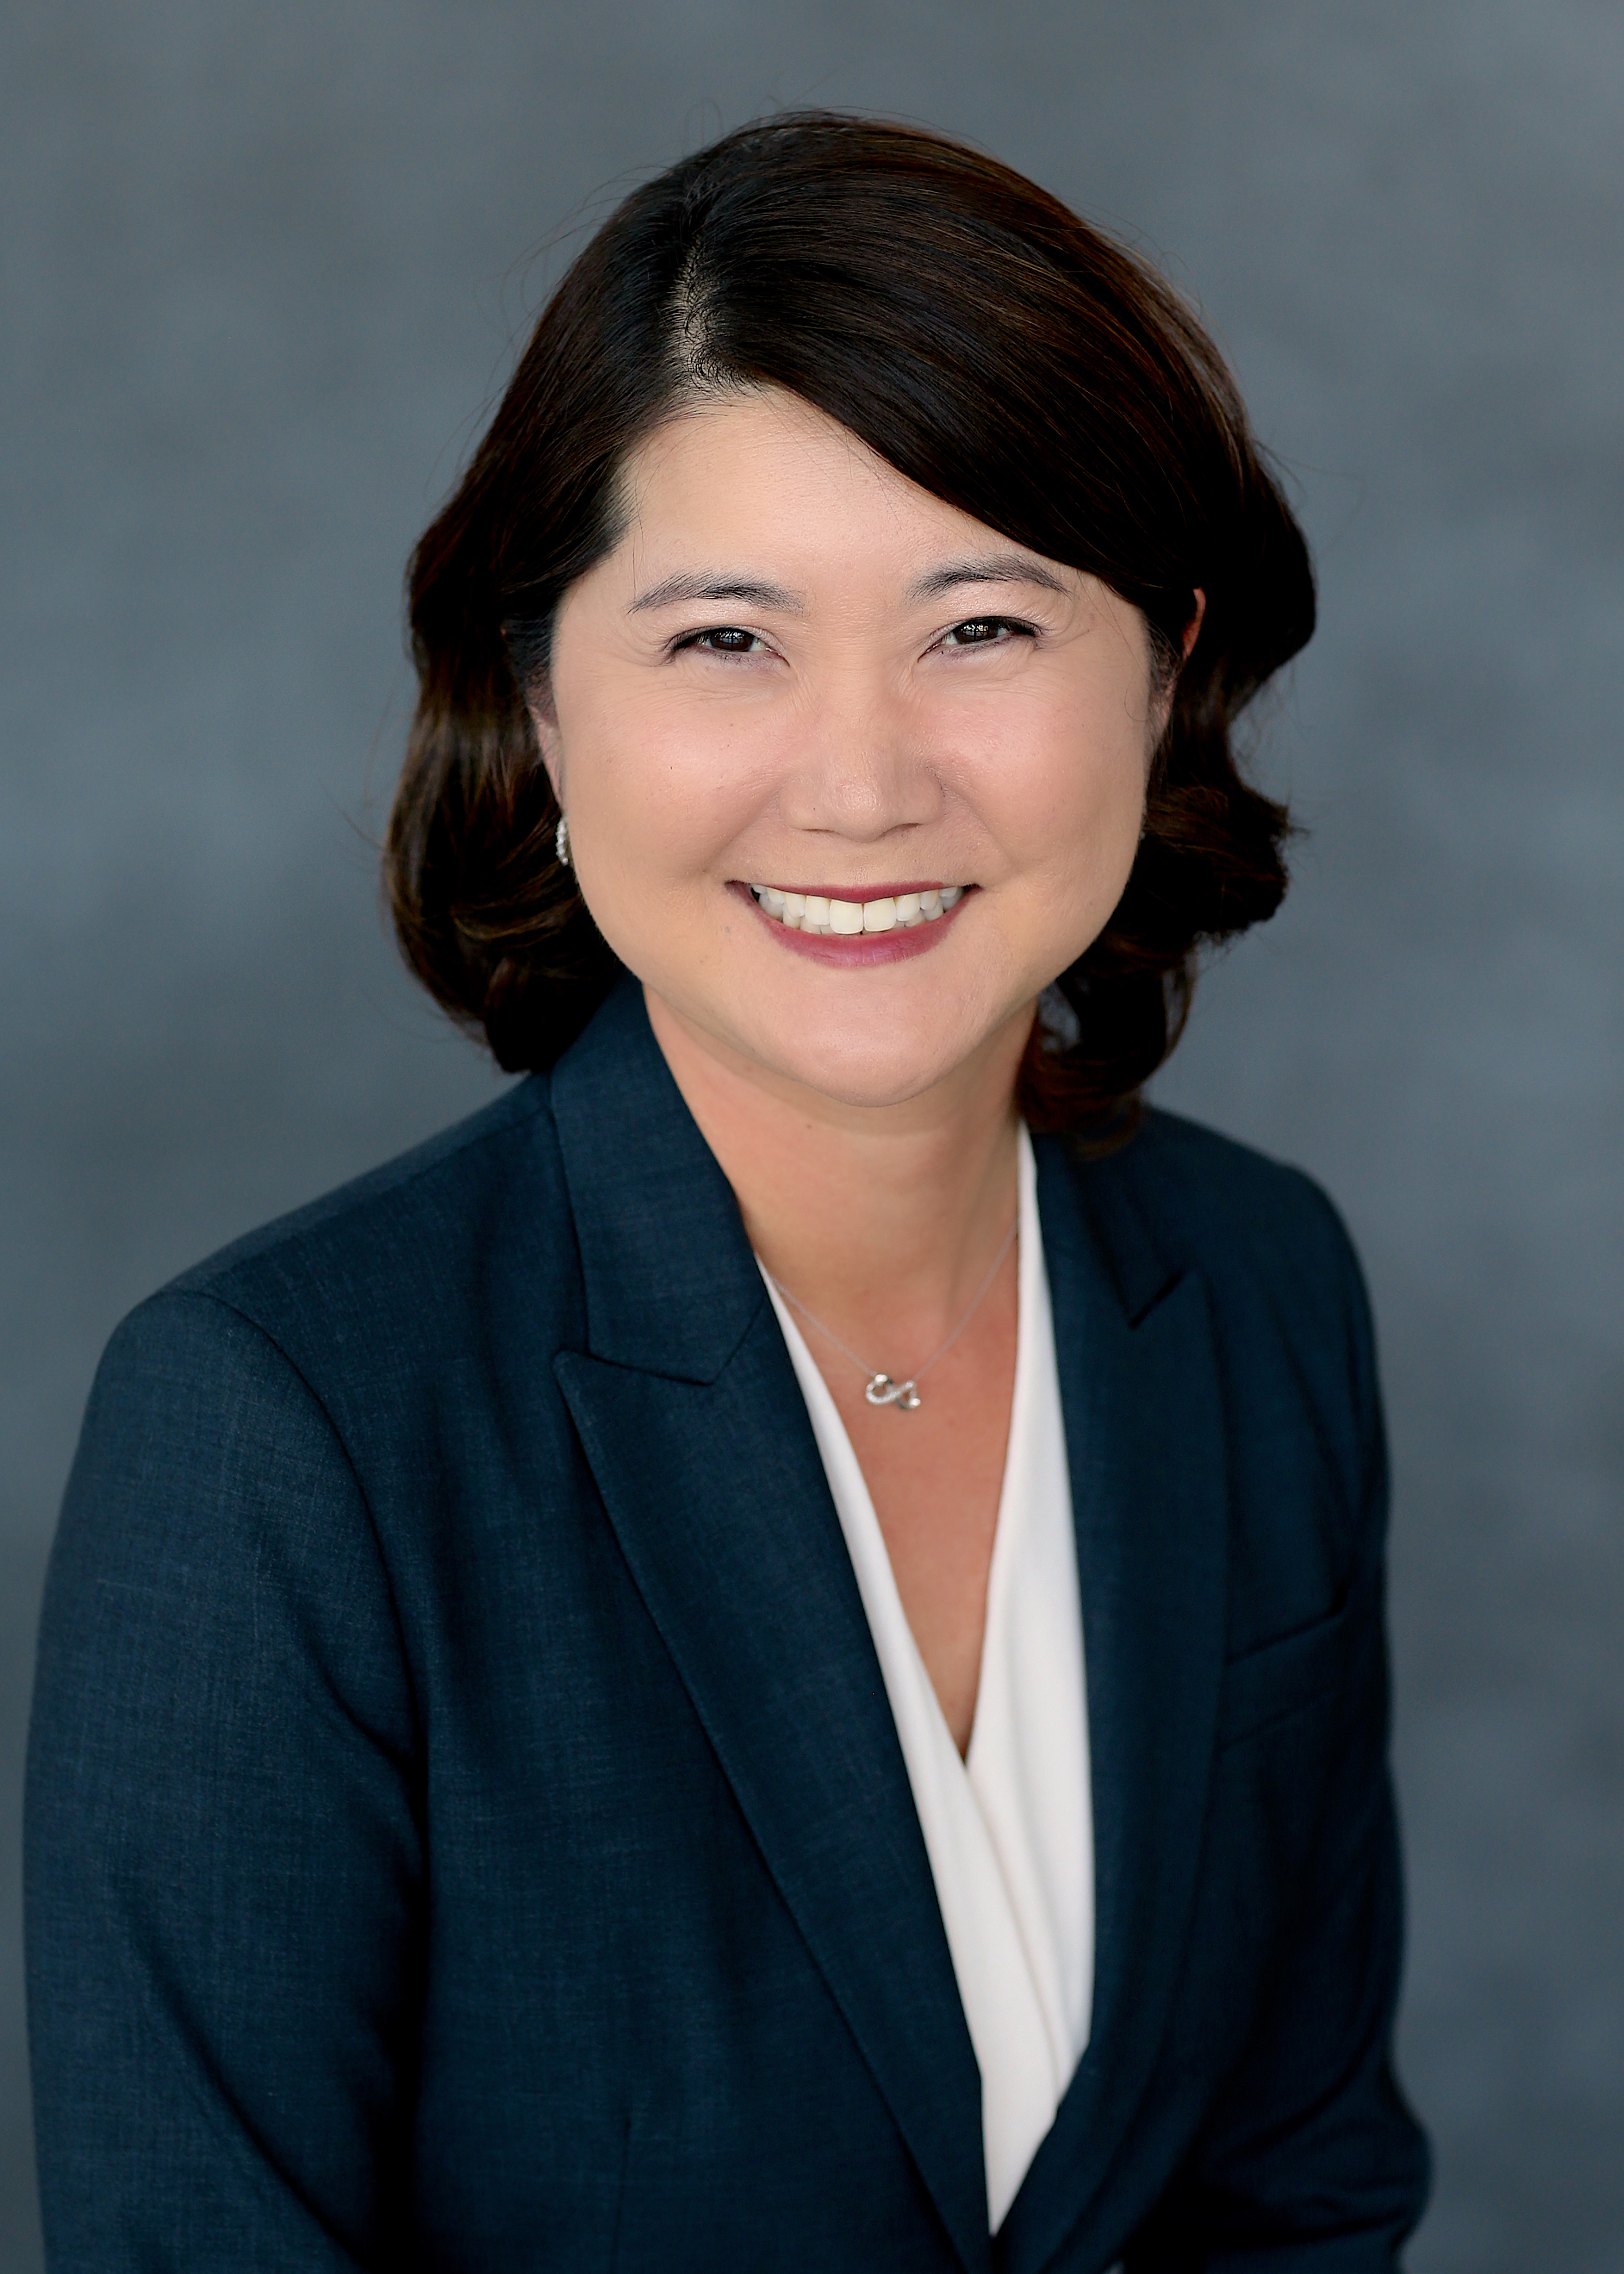 February WAKE UP! Newport - Newport Beach City Manager Update with Grace Leung